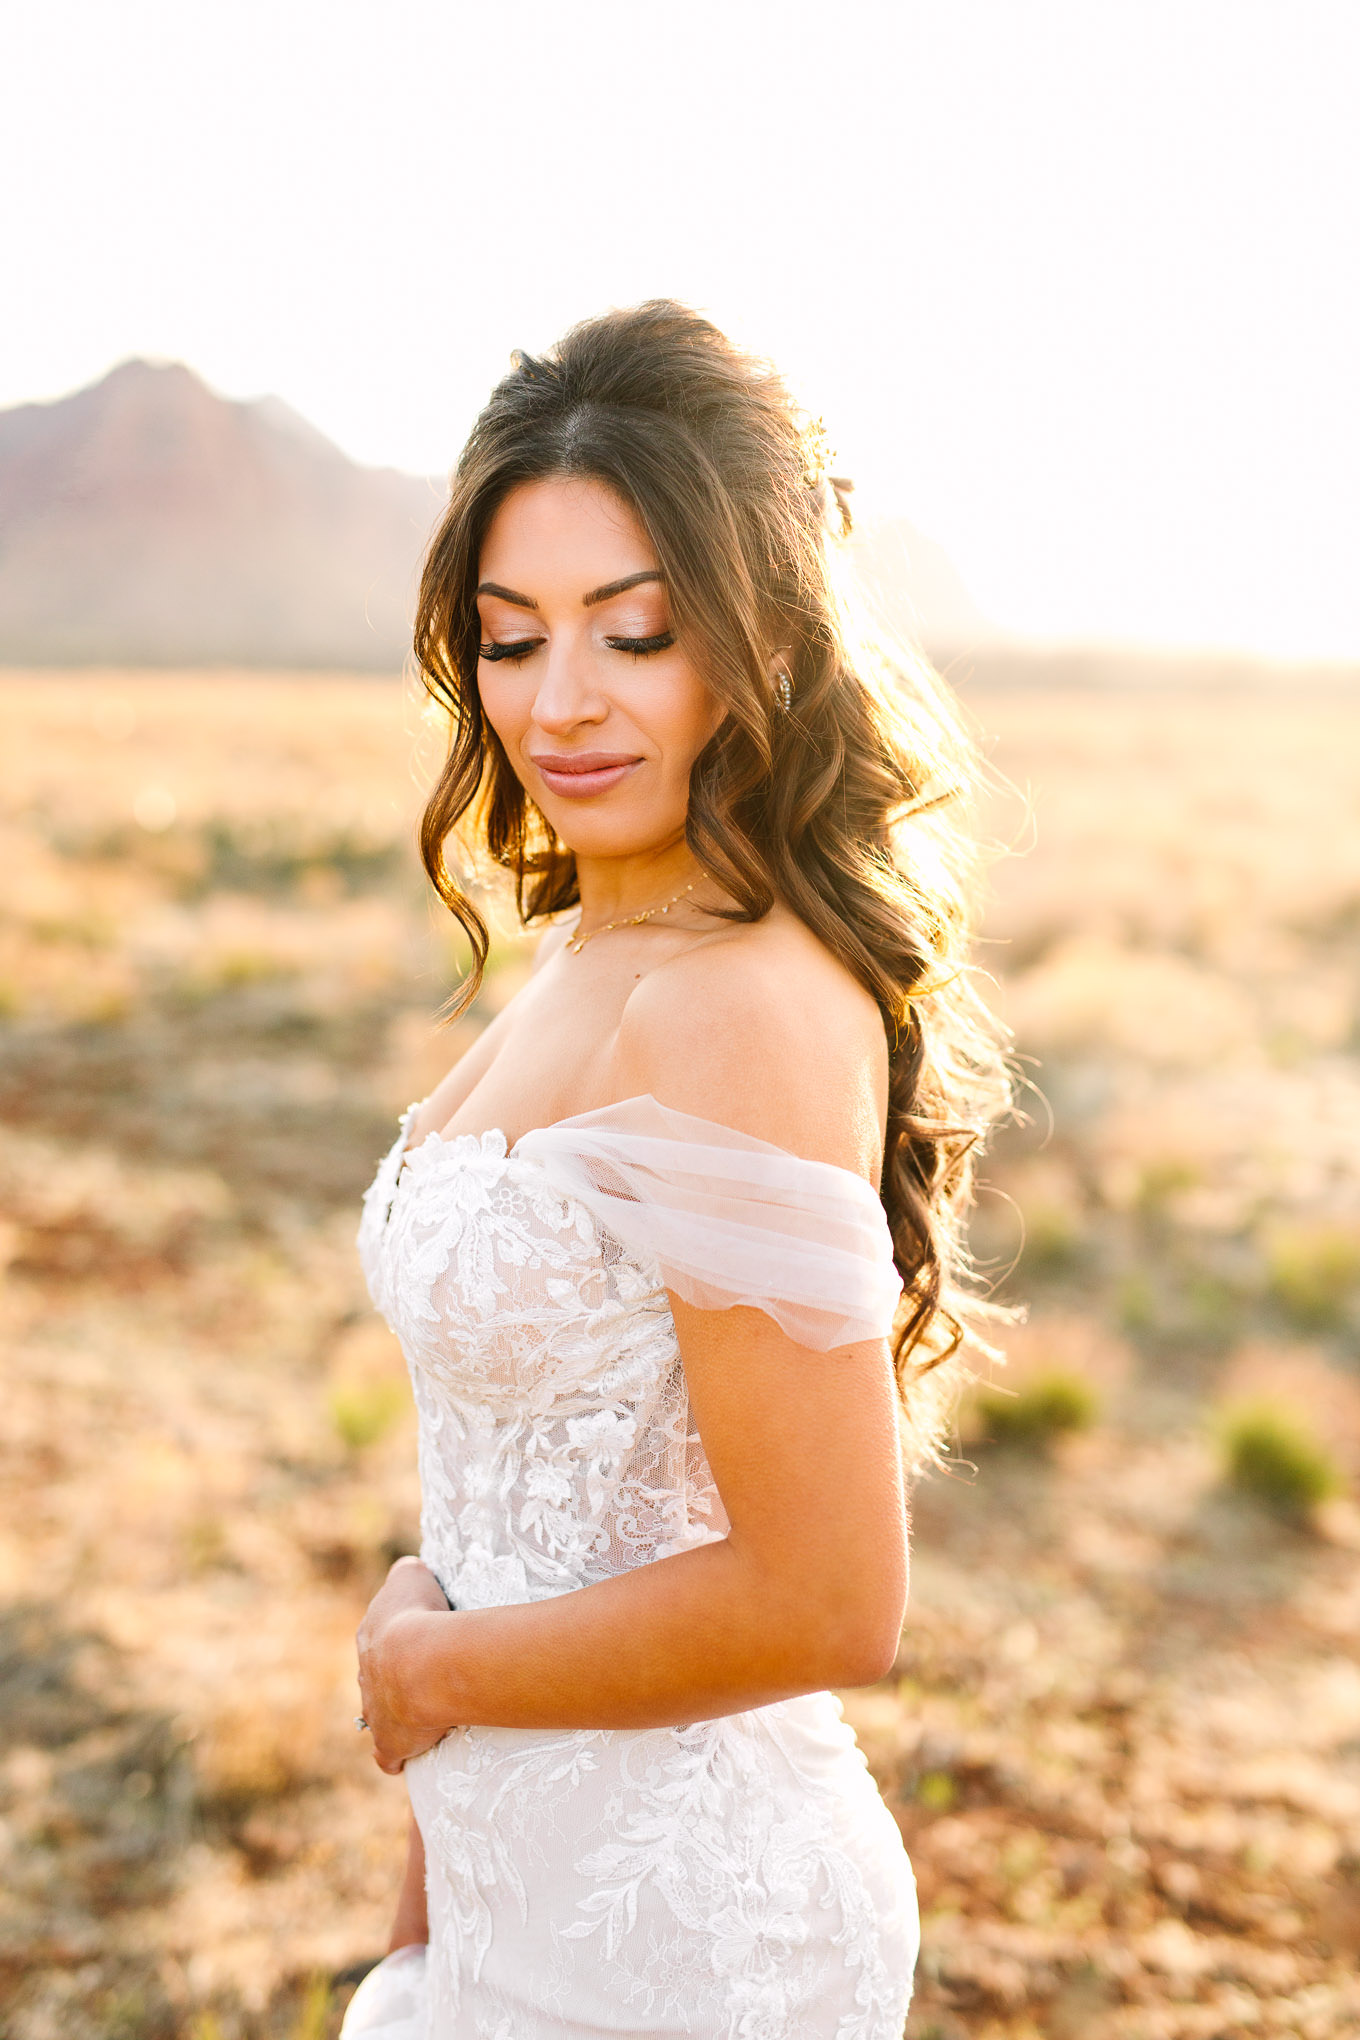 Bridal portrait | Zion Under Canvas camping elopement at sunrise | Colorful elopement photography | #utahelopement #zionelopement #zionwedding #undercanvaszion #sunriseelopement #adventureelopement  Source: Mary Costa Photography | Los Angeles